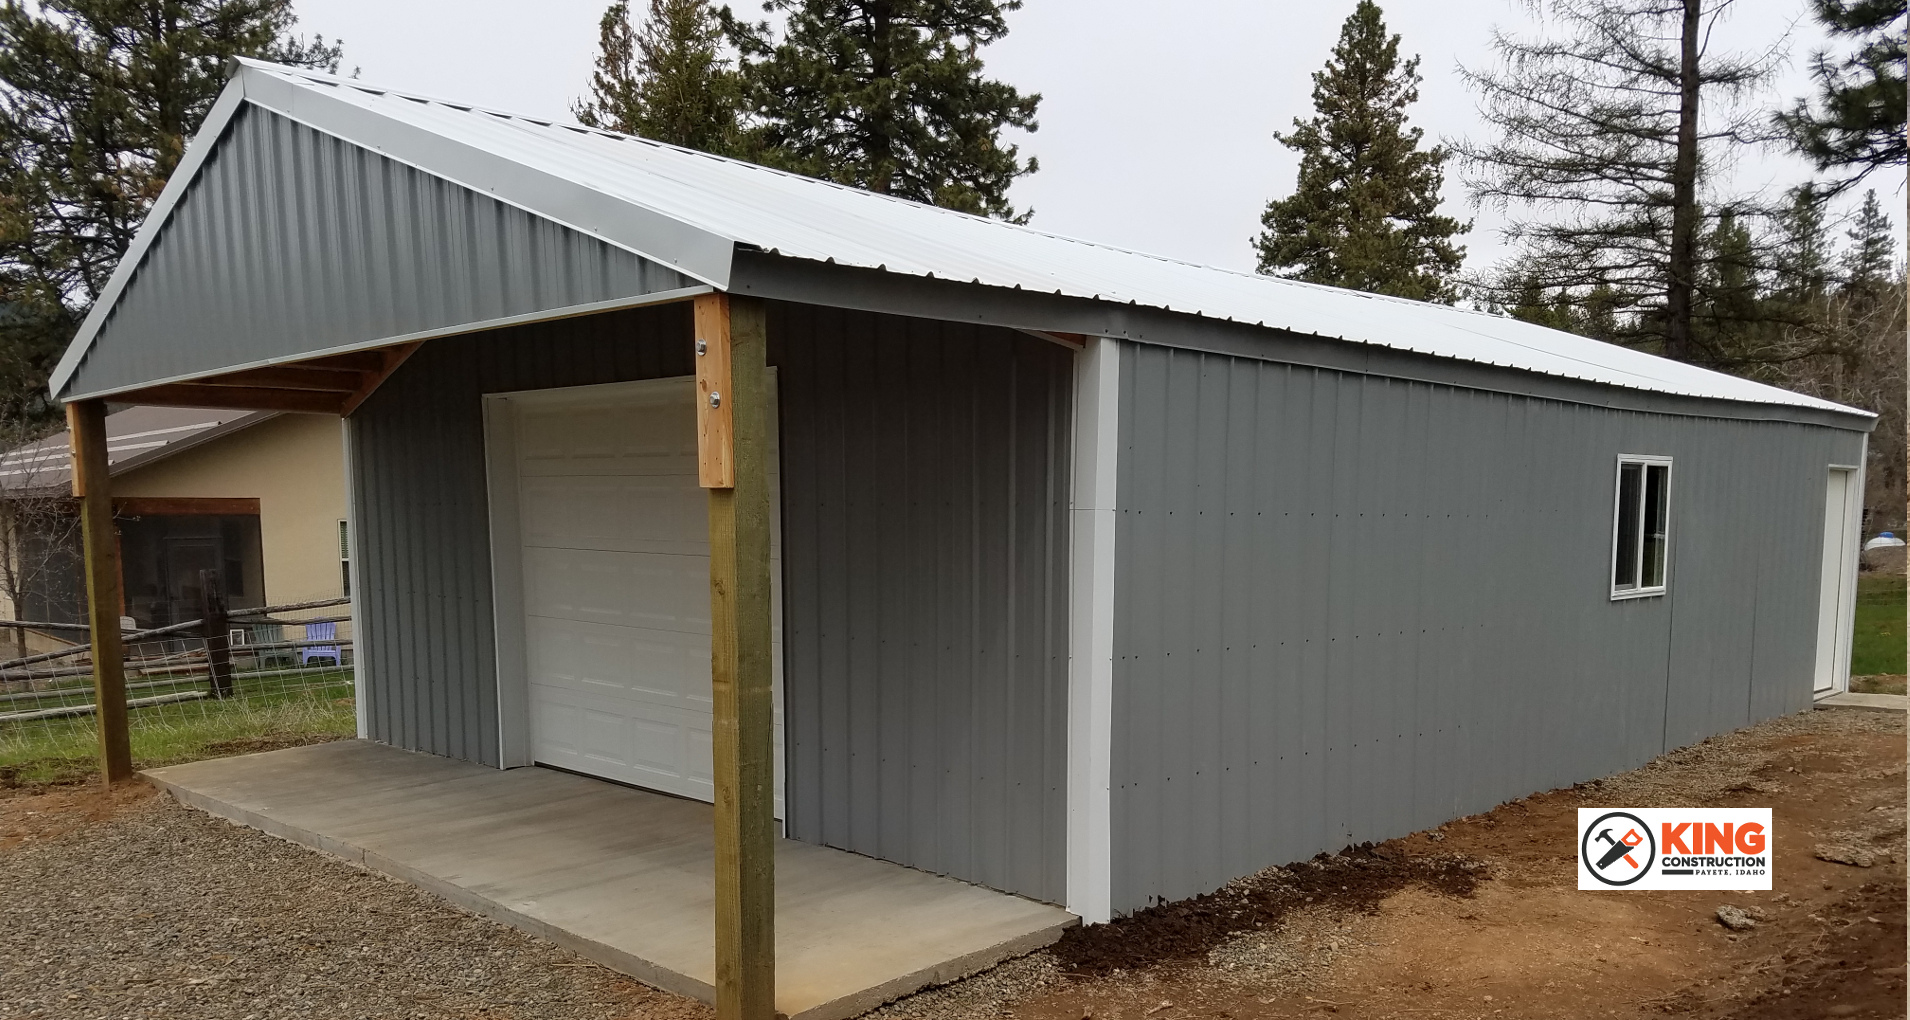 Pole Barn Hay Shed Tack Building Levi King Construction Payette Id